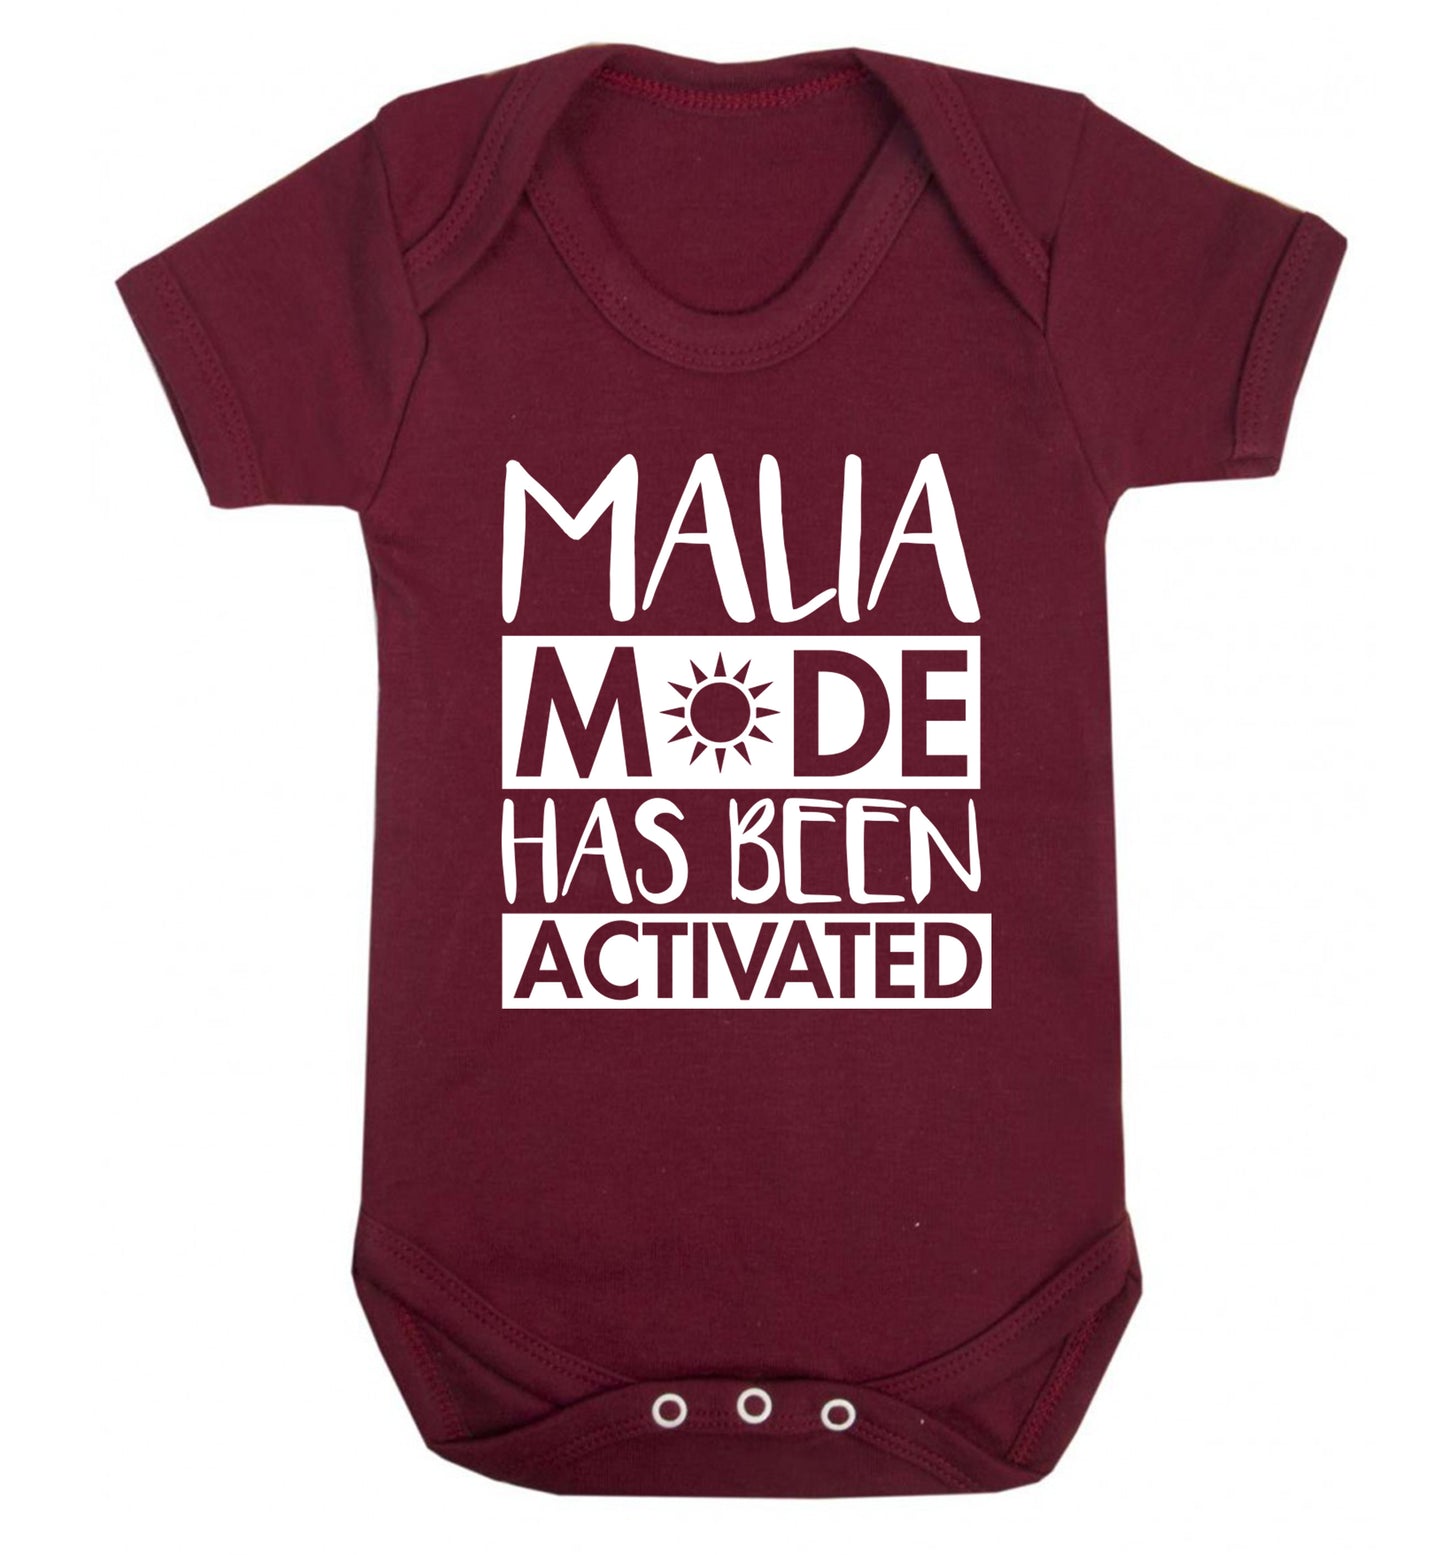 Malia mode has been activated Baby Vest maroon 18-24 months